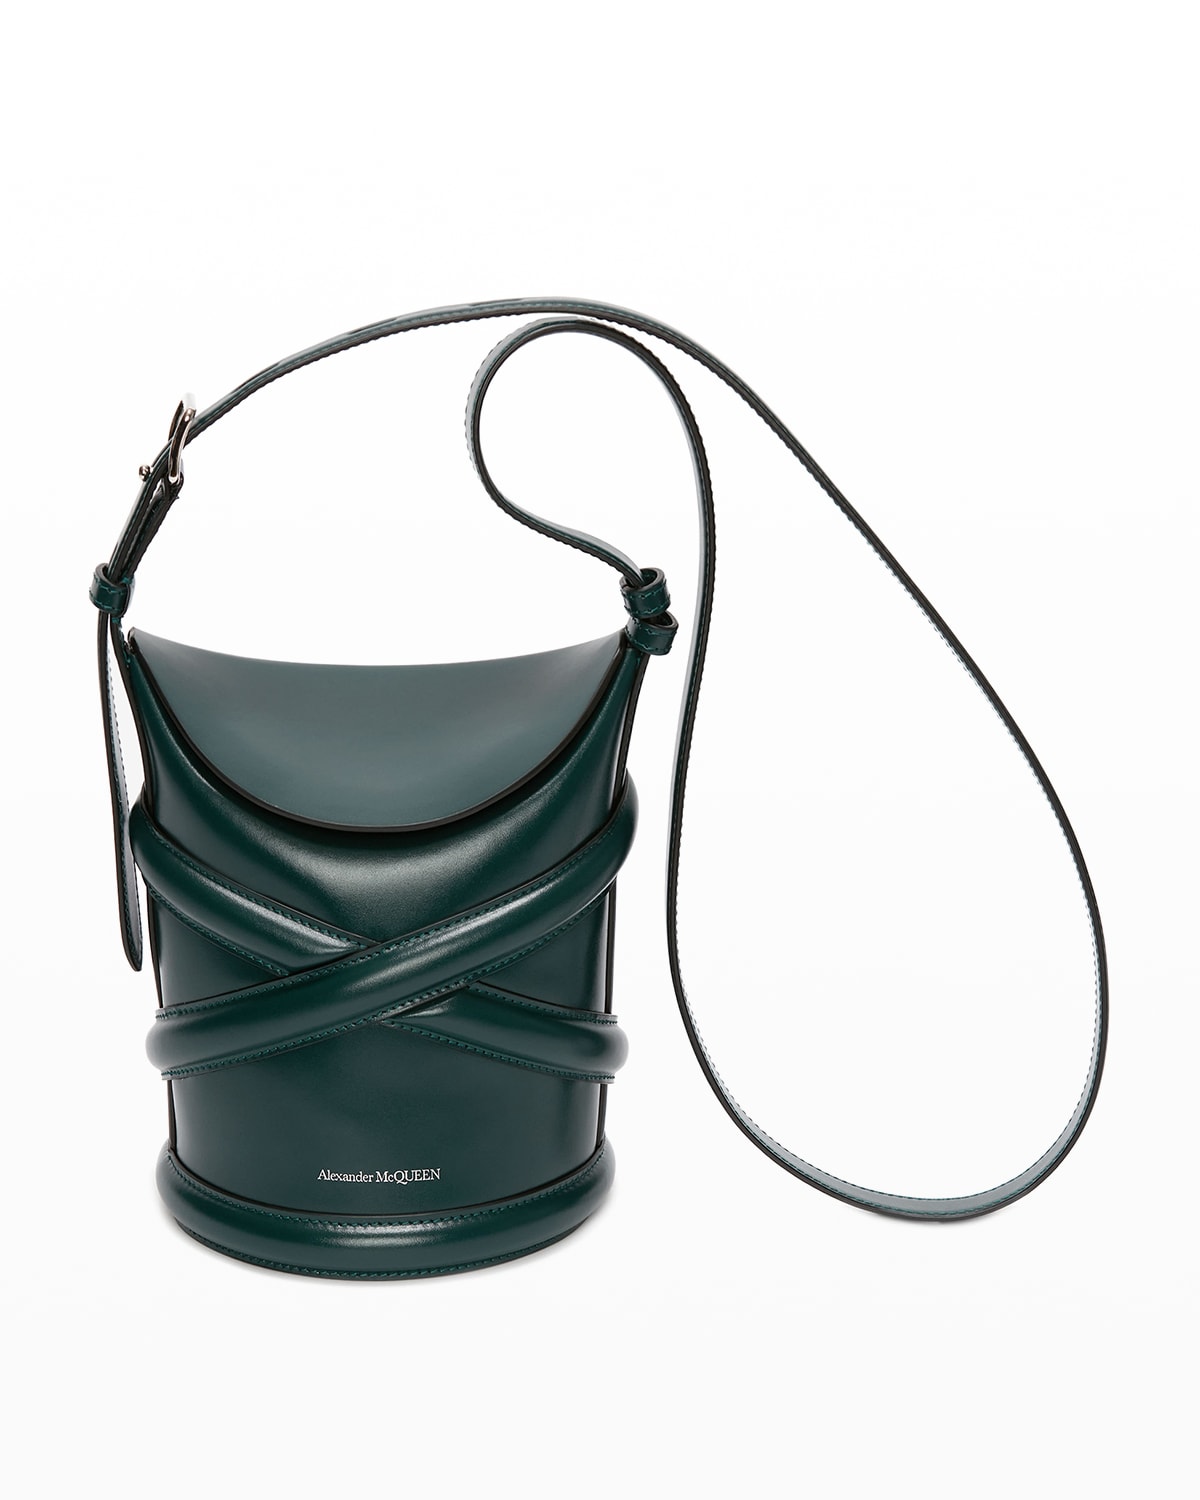 Alexander Mcqueen The Curve Small Hobo Bucket Bag In Forest Green